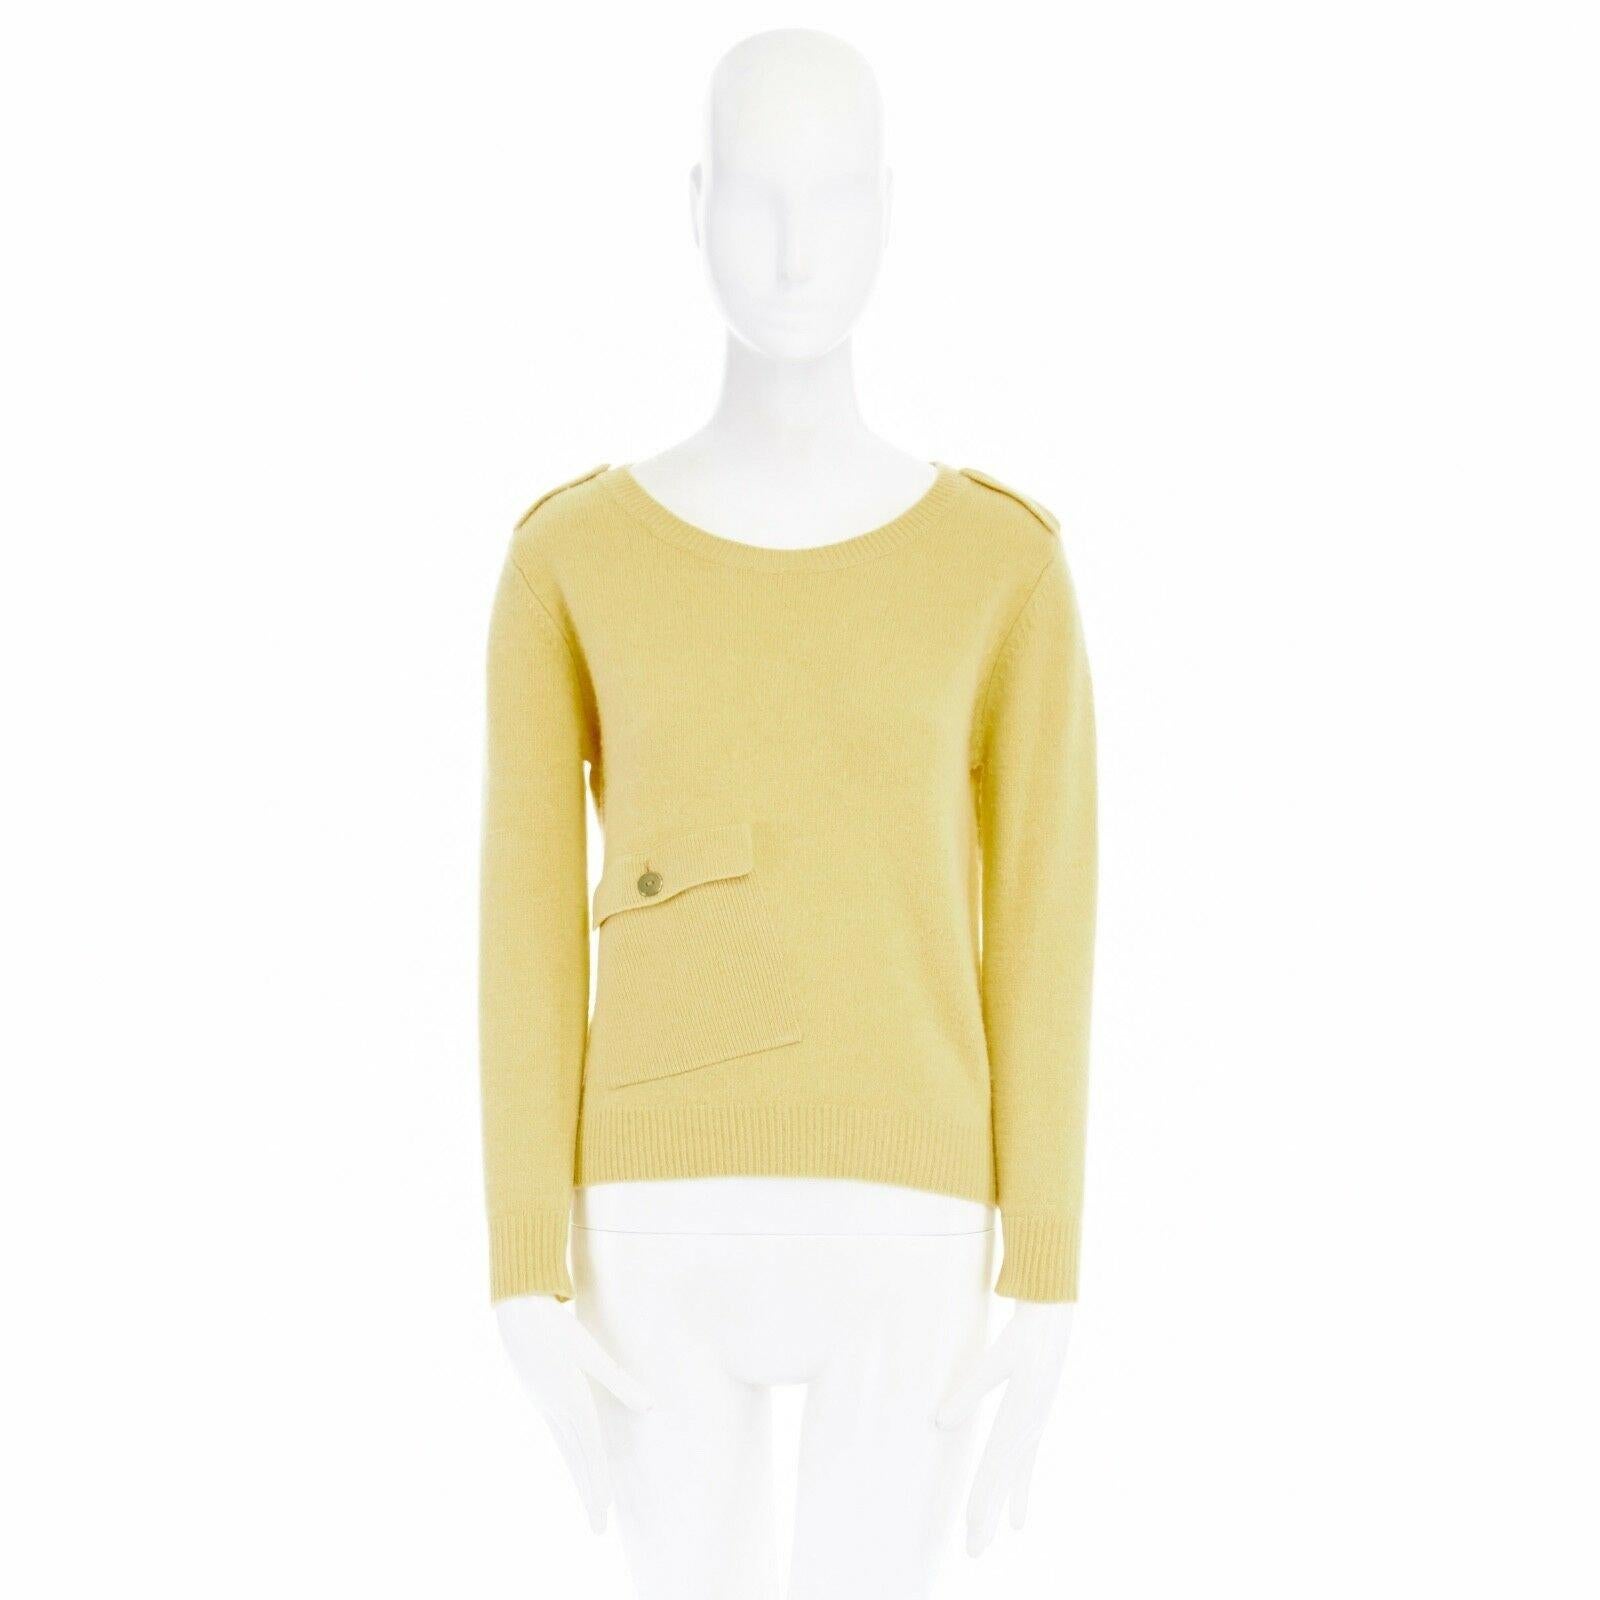 MAX & CO. MAX MARA 100% wool canary yellow patch pocket sweater top S
Brand: Max and Co
Model Name / Style: Sweater
Material: Wool
Color: Yellow
Pattern: Solid
Closure: Pull on
Extra Detail: Gold-tone button. Flap front pocket. Shoulder epaulette.